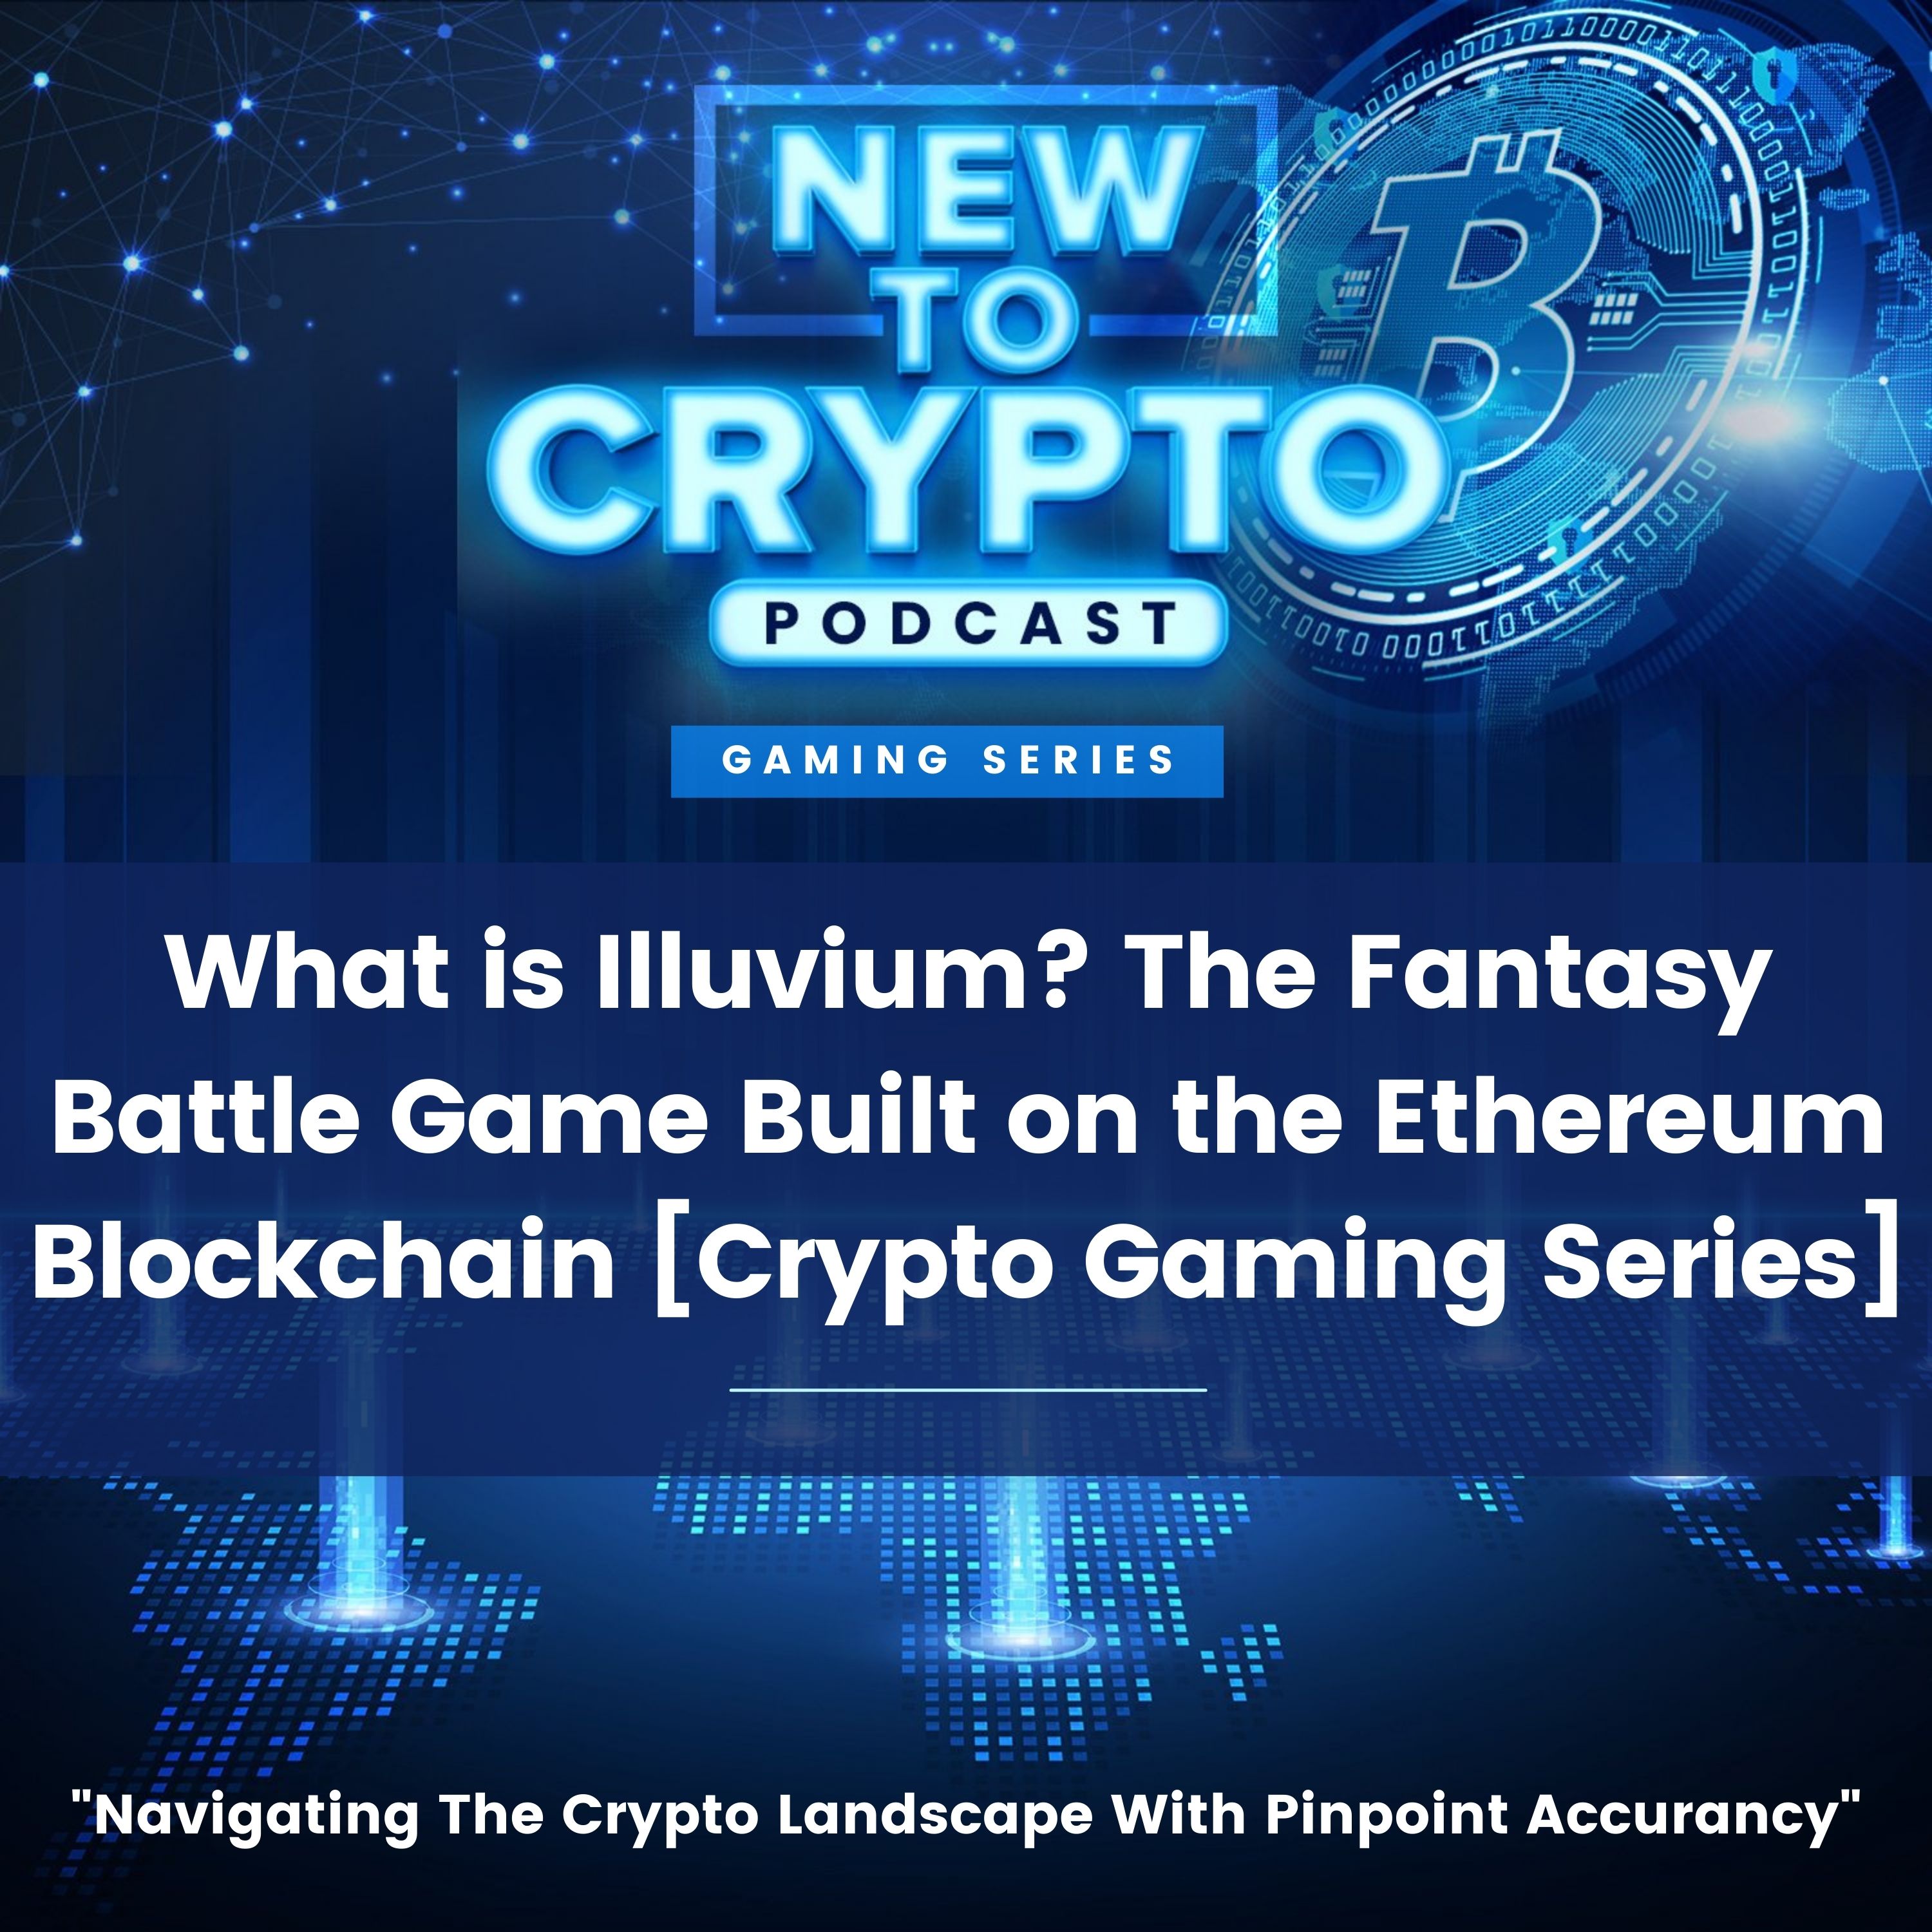 What is Illuvium? The Fantasy Battle Game Built on the Ethereum Blockchain [Crypto Gaming Series]